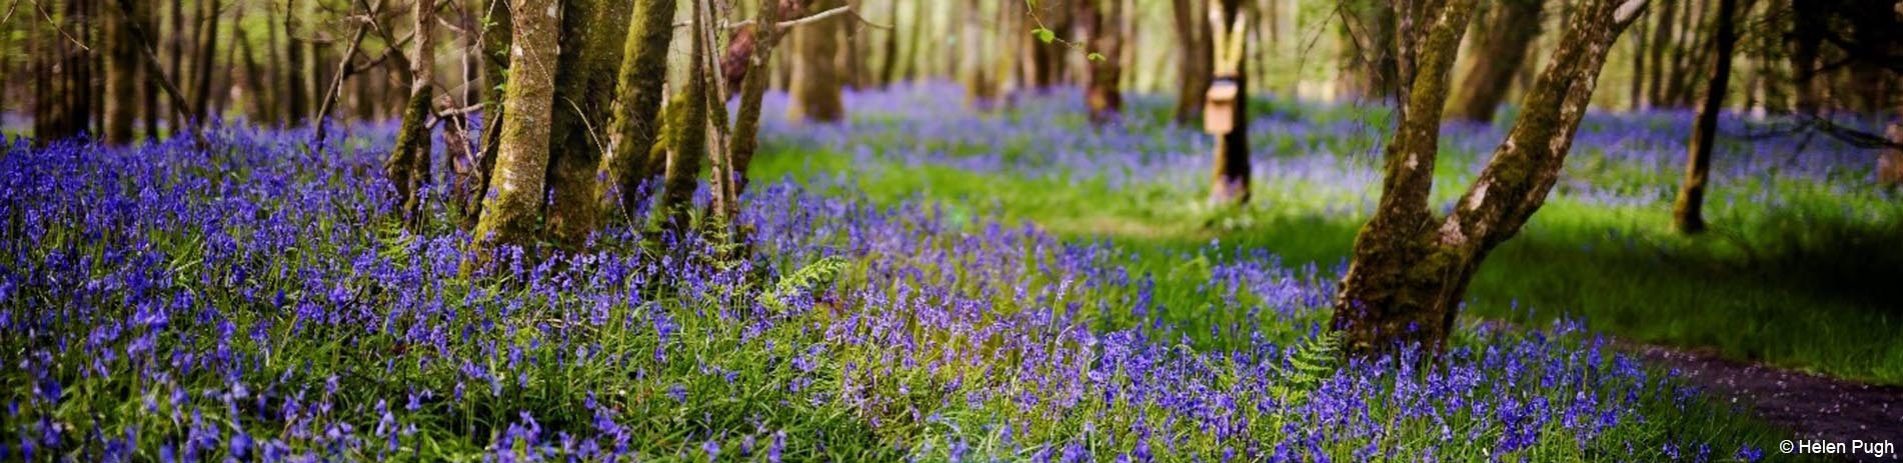 beautiful-oak-forest-carpeted-by-thousands-of-bluebells